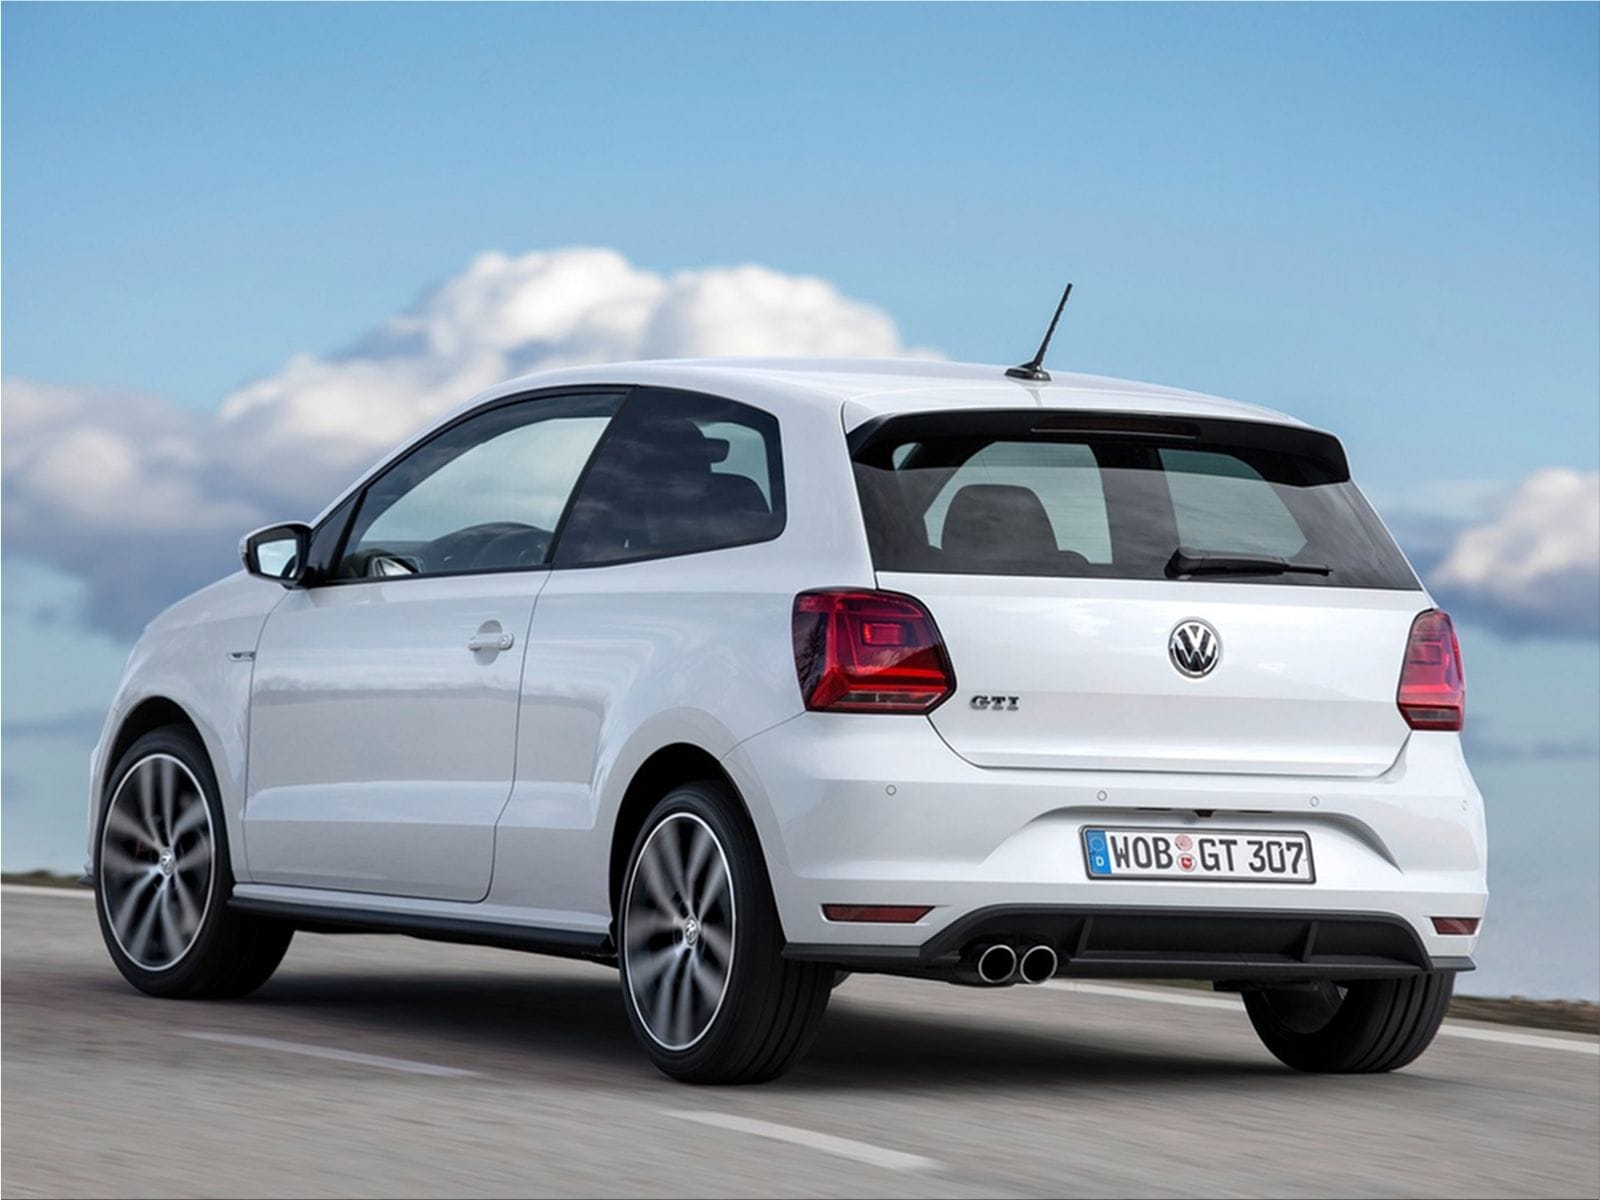 The new Volkswagen Polo GTI performance and character